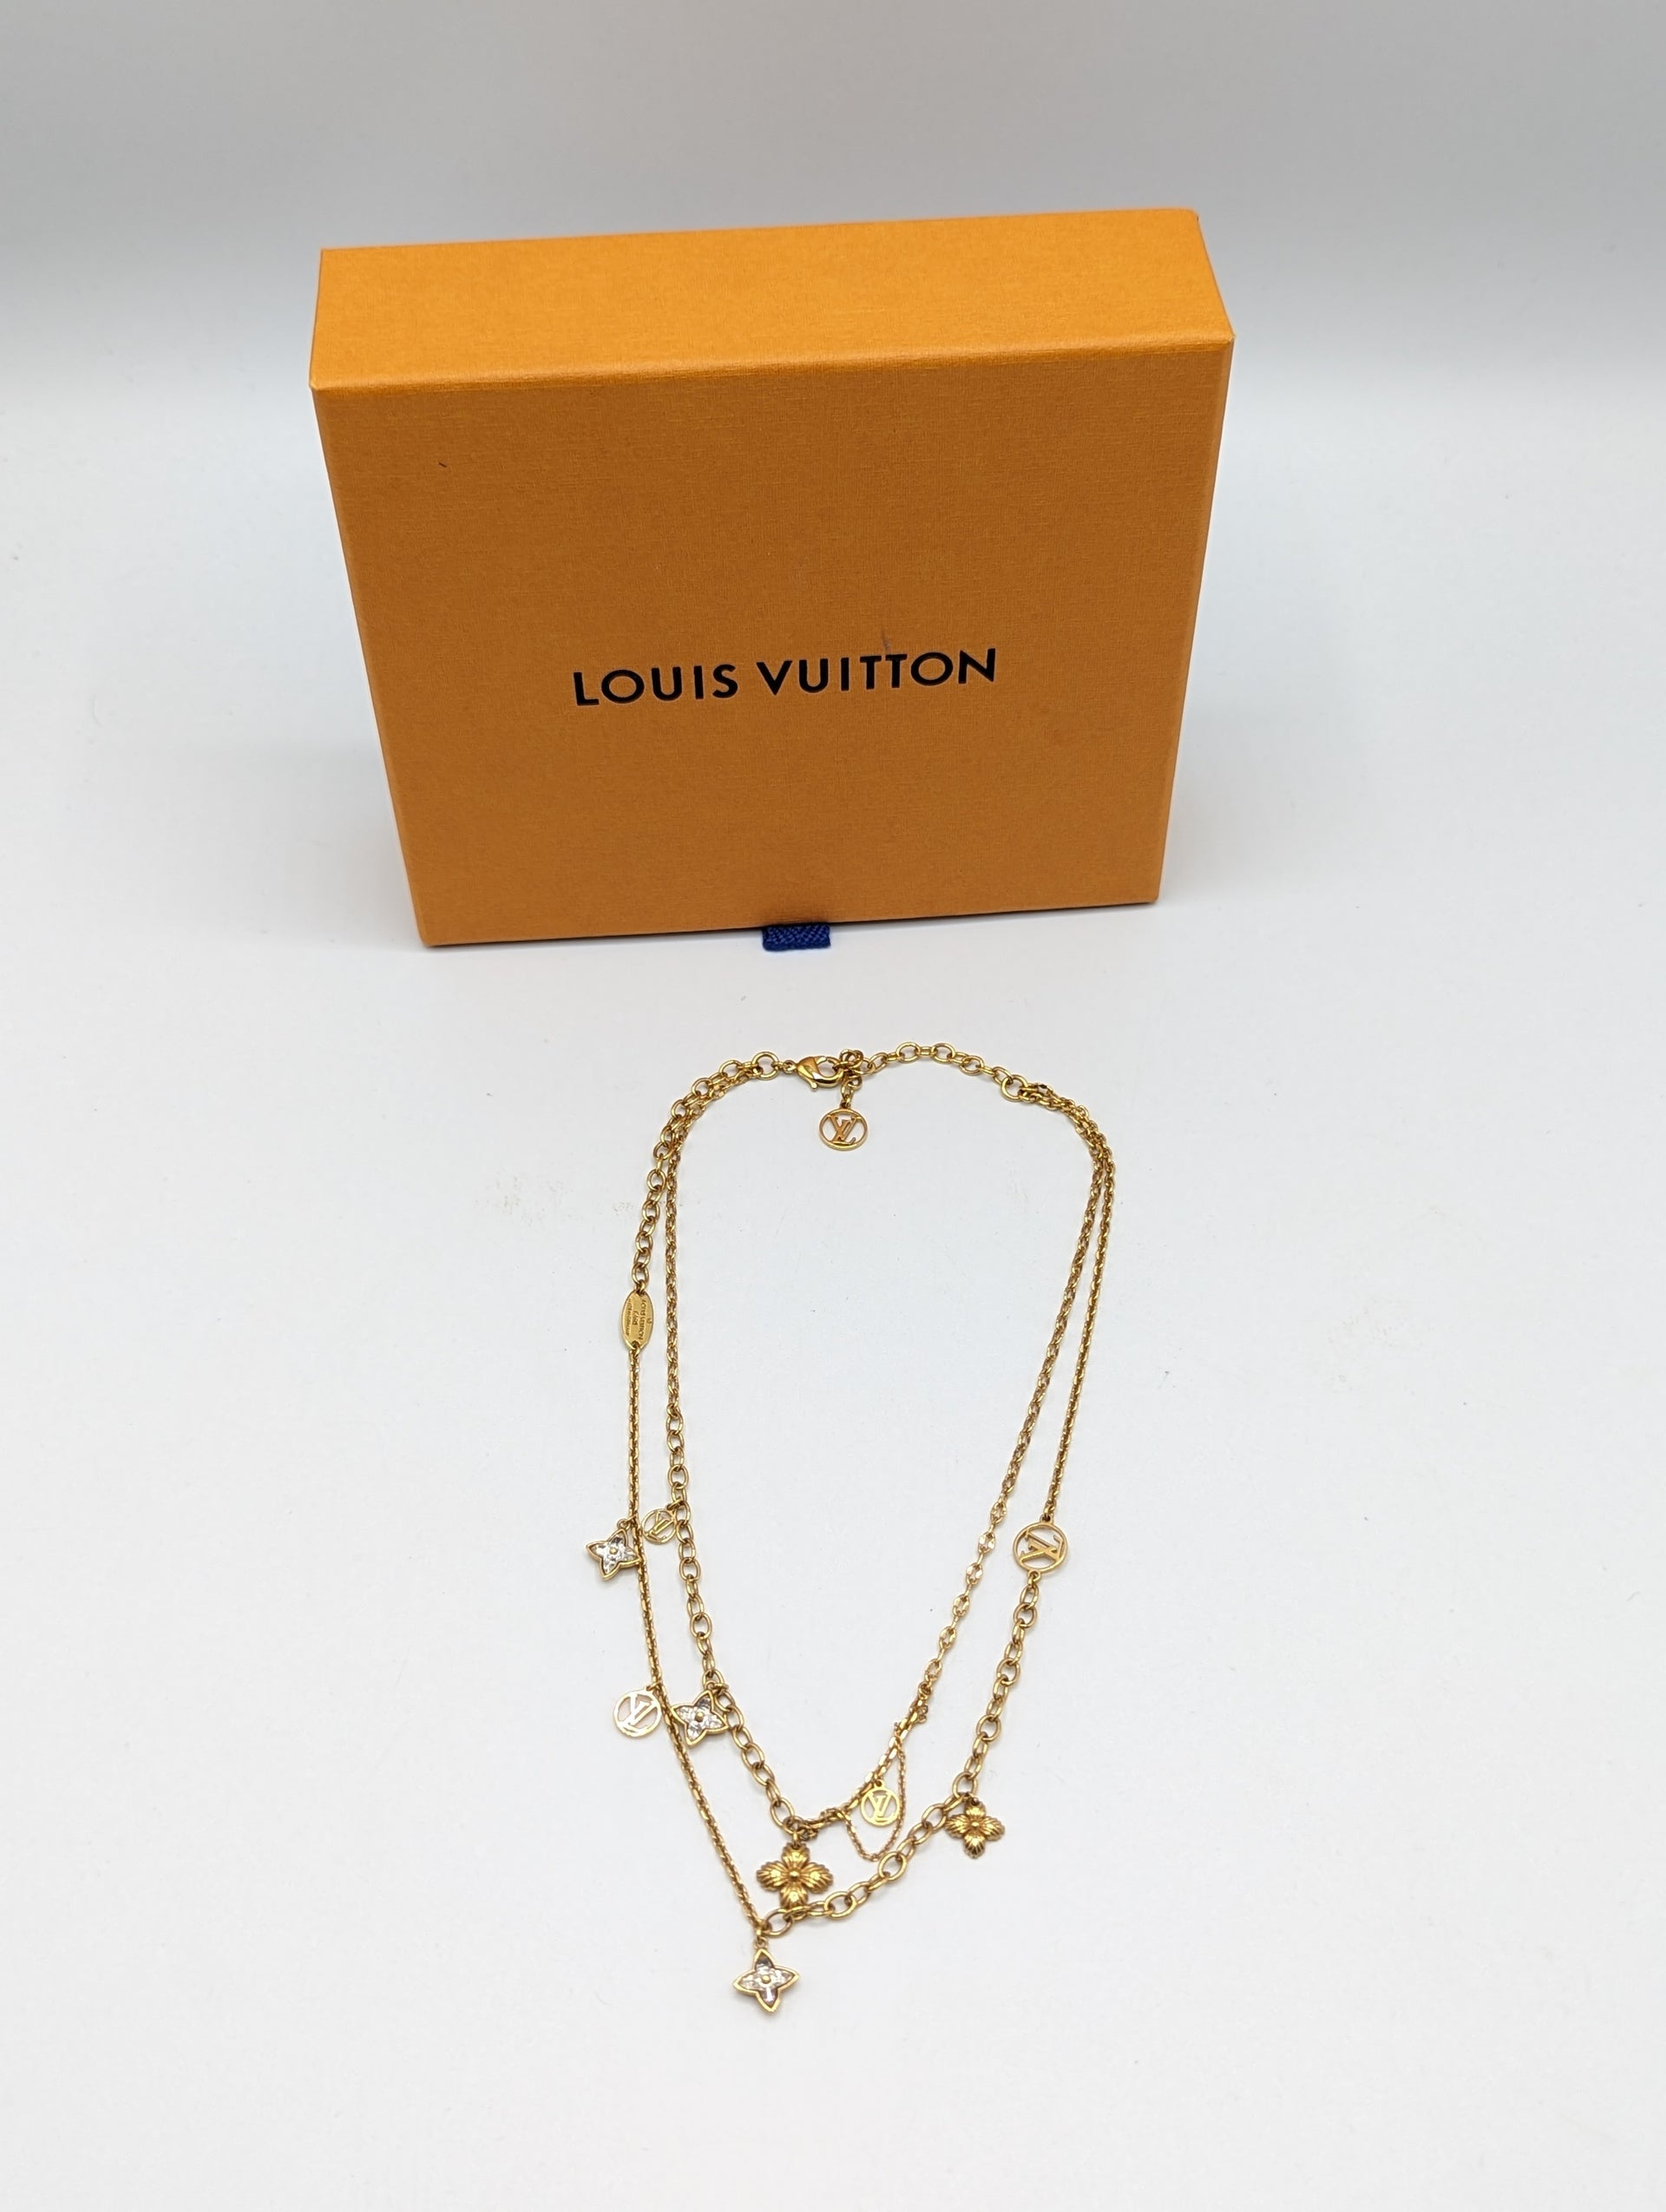 Louis Vuitton Blooming Strass necklace  Shop necklaces, Louis vuitton,  Necklace